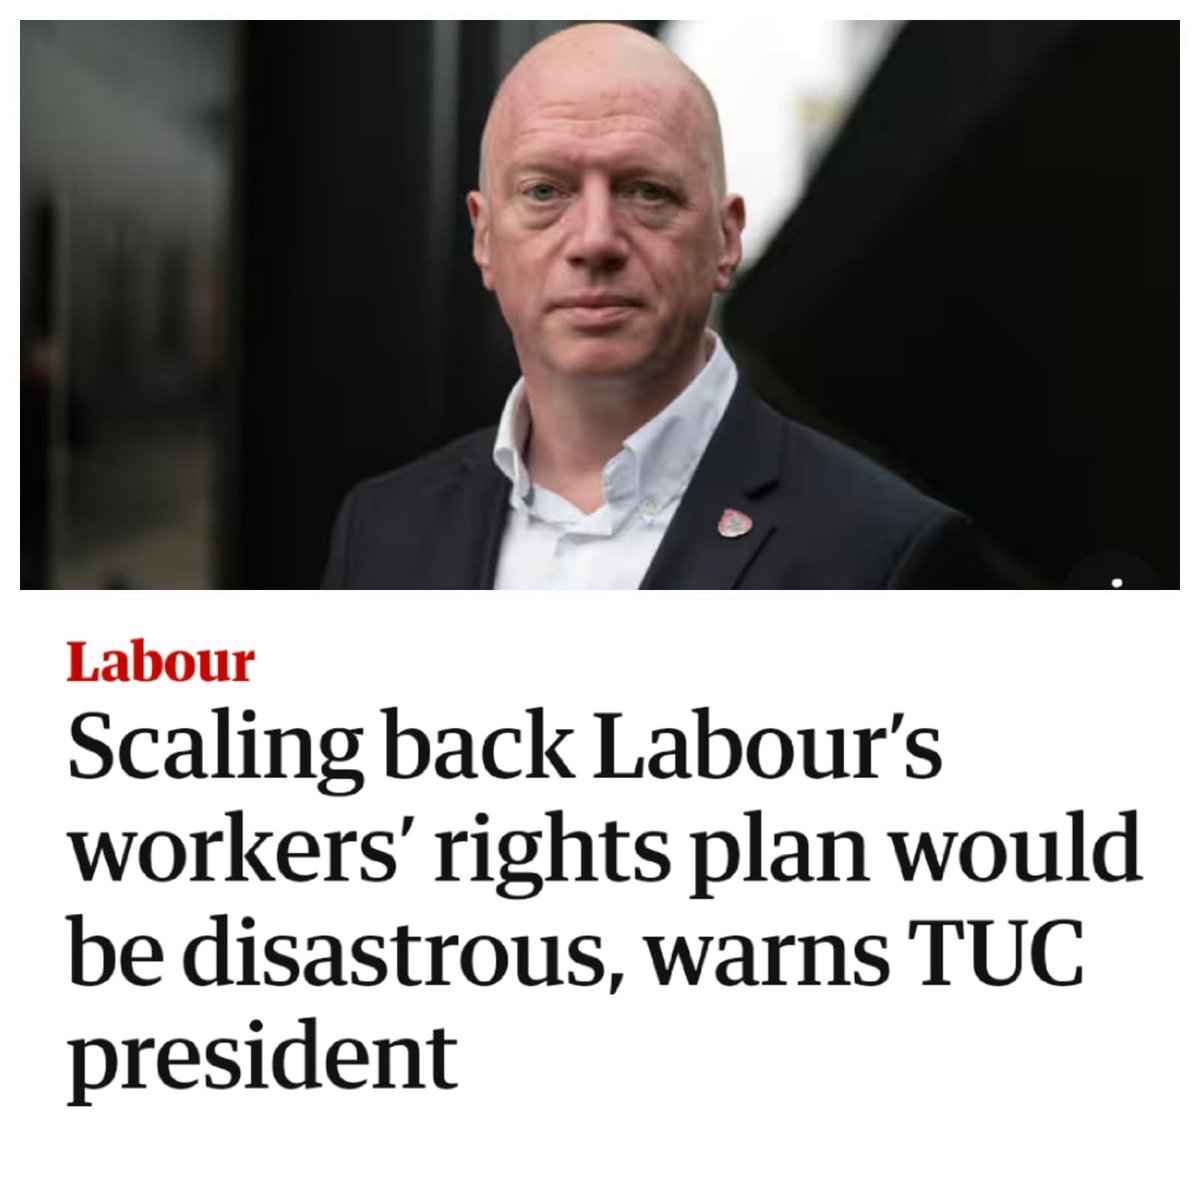 We know Labour will come under pressure from business interests but there should be no backtracking and no weakening. But Labour needs to deliver the New Deal for Working People as one of its top priorities. I agree with @MattWrack.